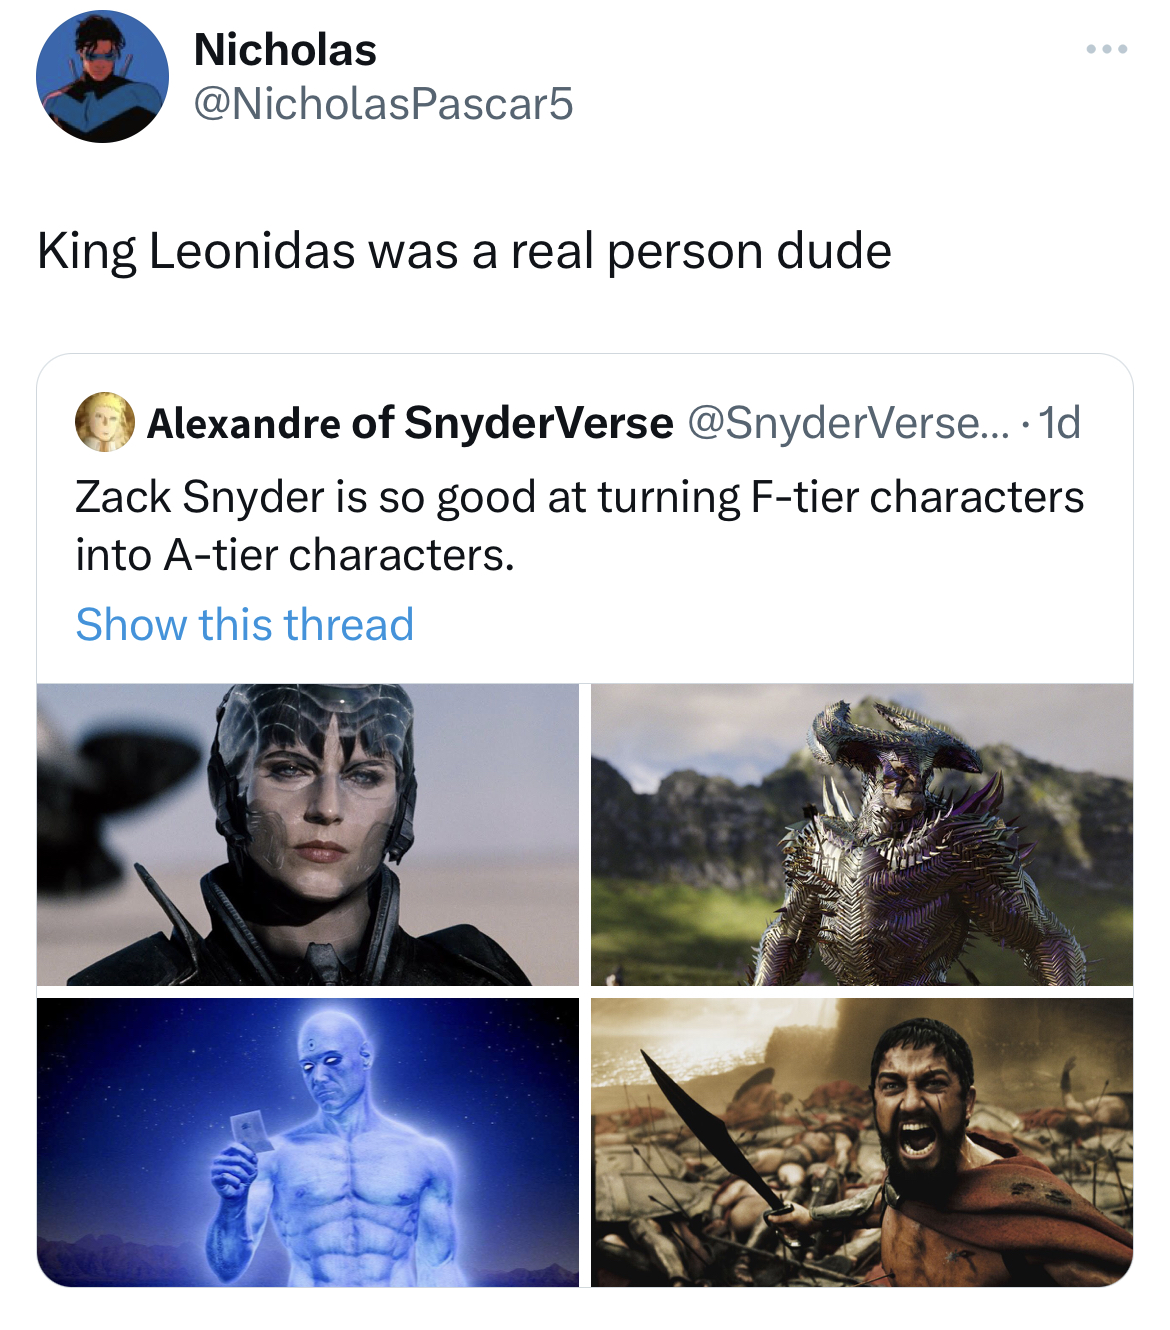 savage tweets - 300 - Nicholas King Leonidas was a real person dude Alexandre of SnyderVerse .... 1d Zack Snyder is so good at turning Ftier characters into Atier characters. Show this thread B